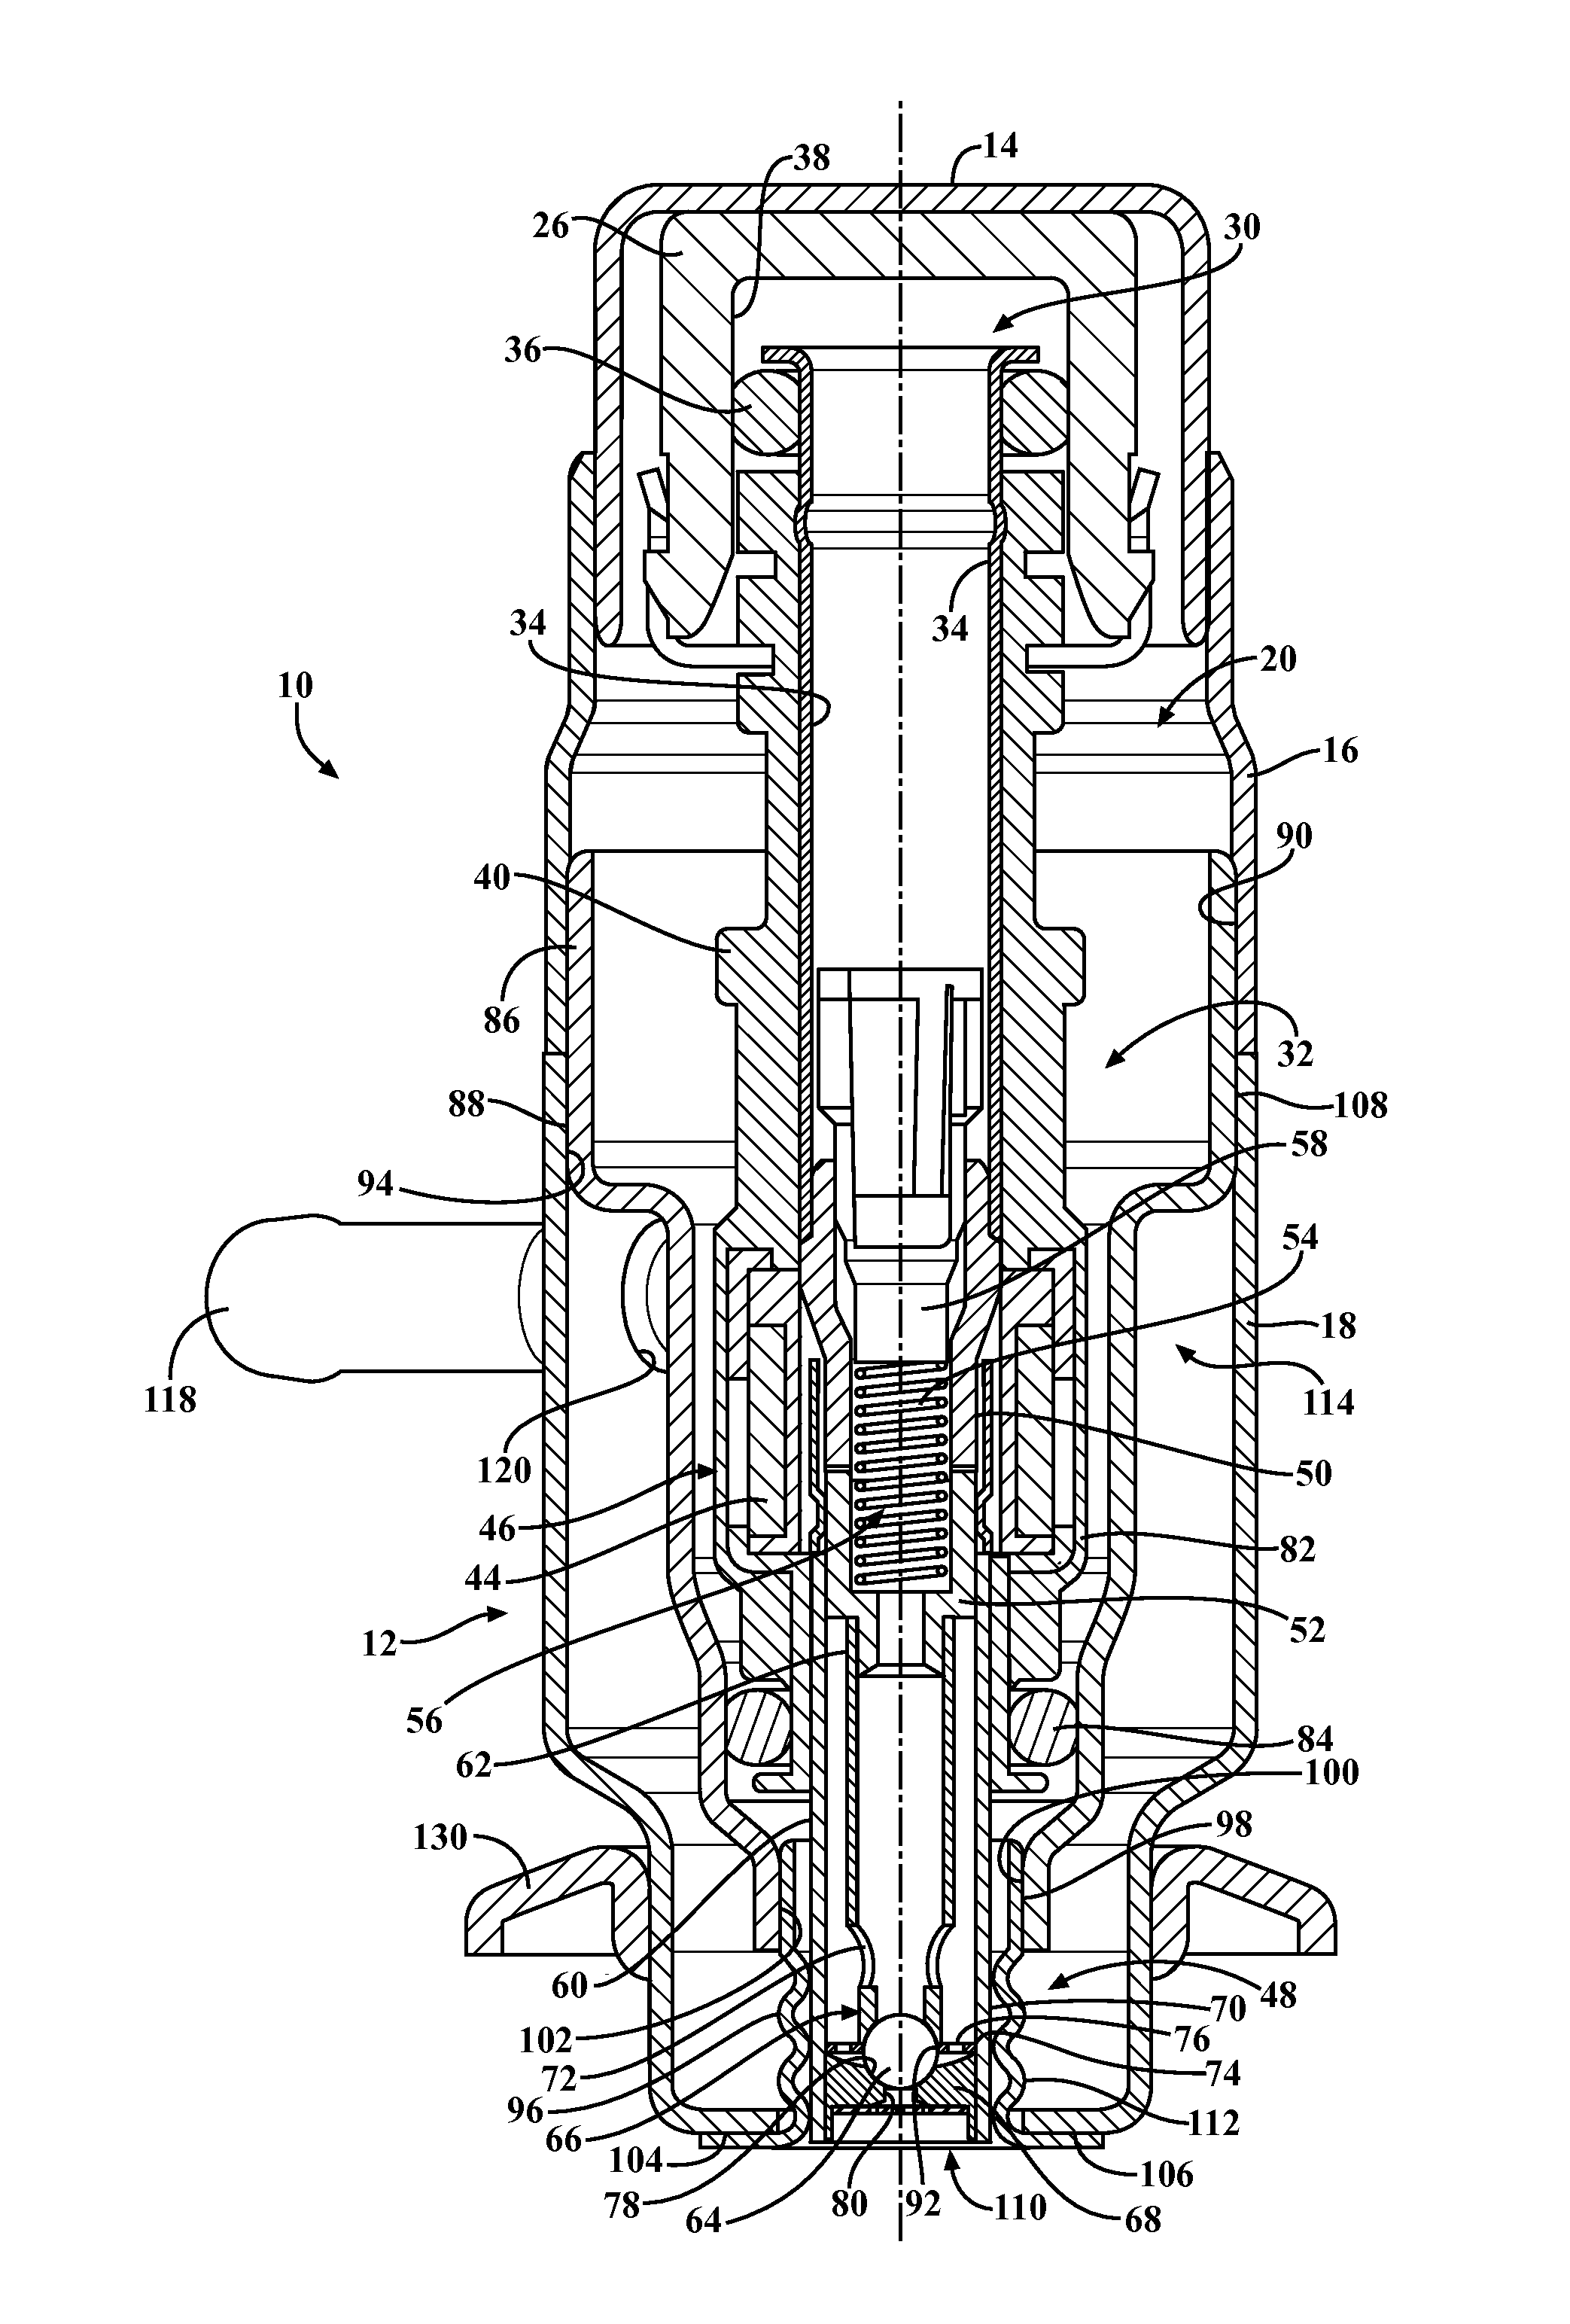 Liquid cooled reductant delivery unit for automotive selective catalytic reduction systems